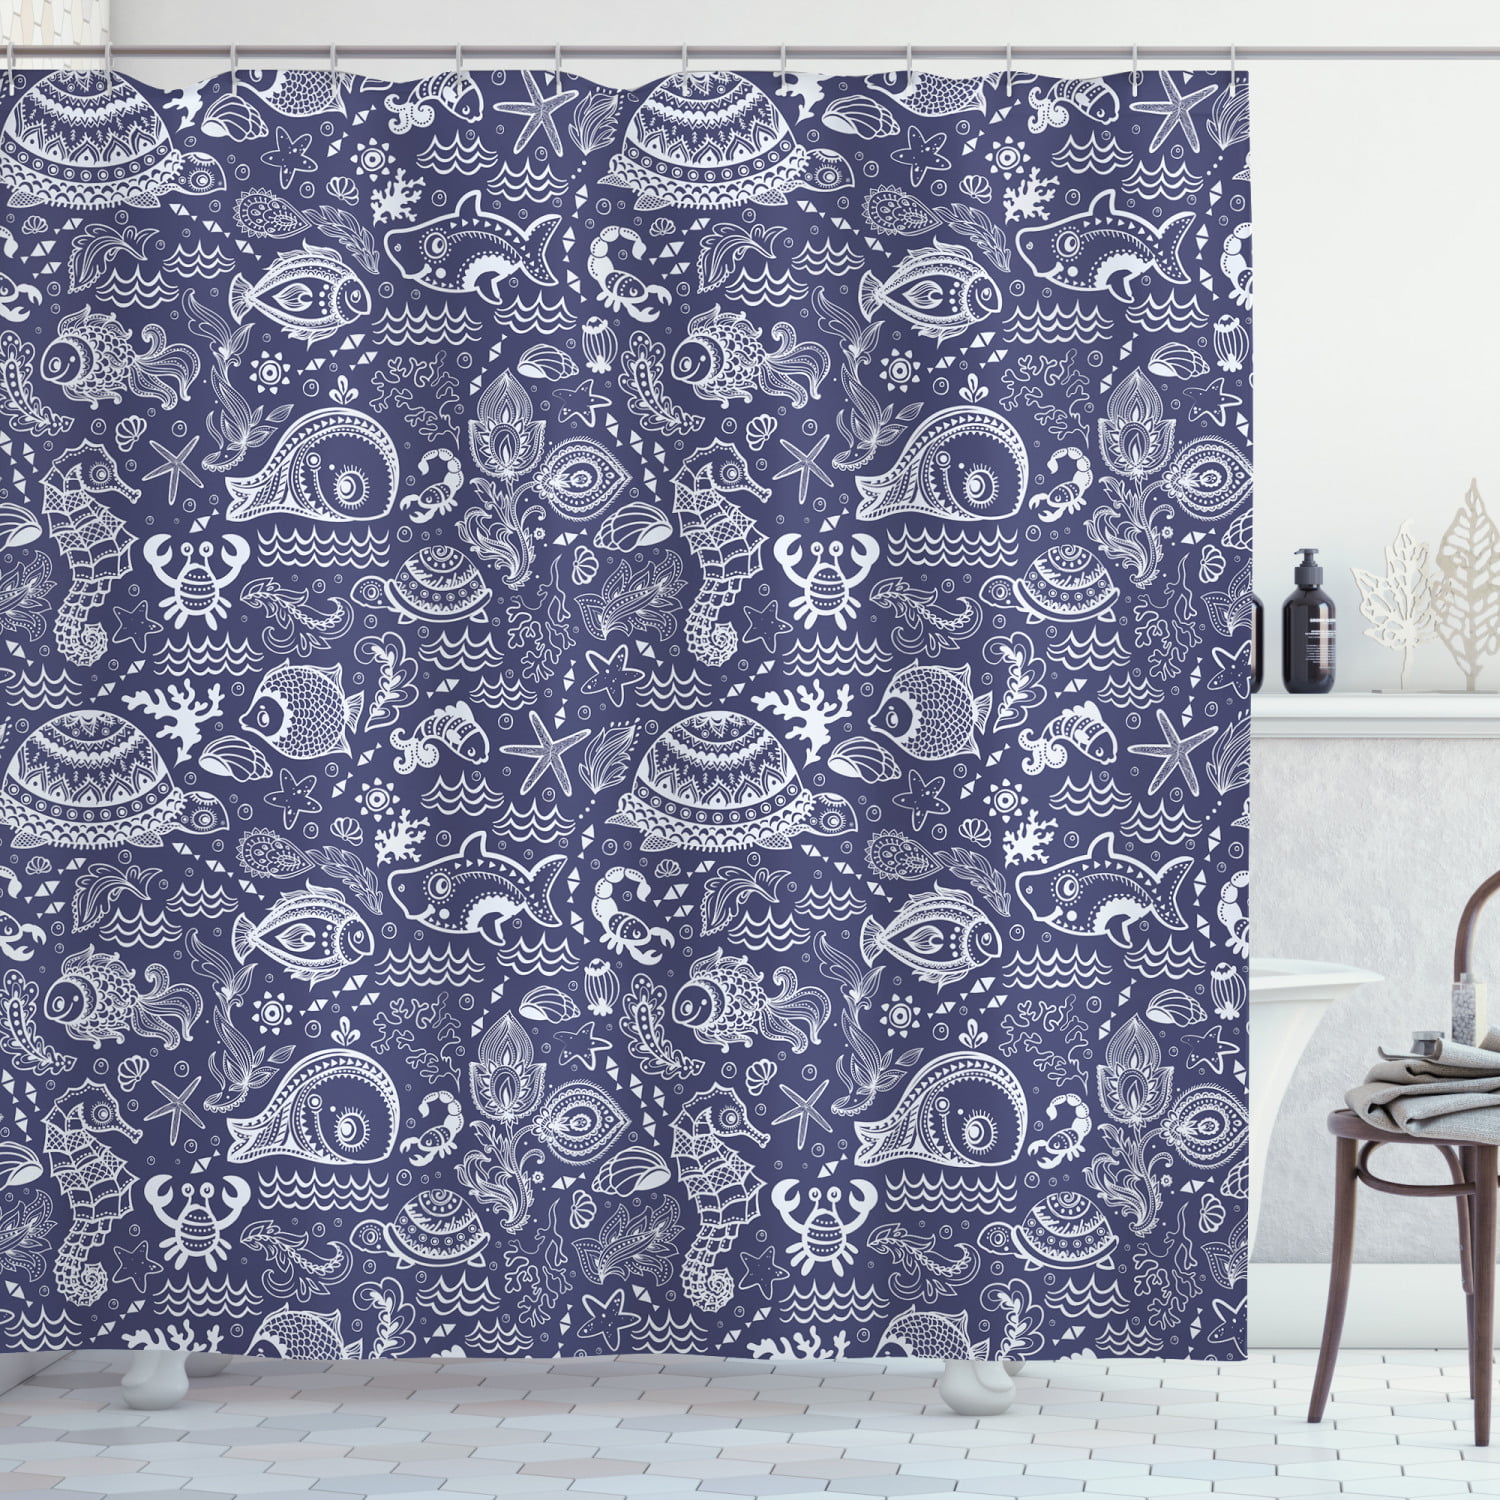 Cloth Fabric Bathroom Decor Set with Hooks Sealife Ocean Creatures Seahorses Shells Fish Stars Floral Details Artwork 70 Long Black and White Ambesonne Sketchy Shower Curtain